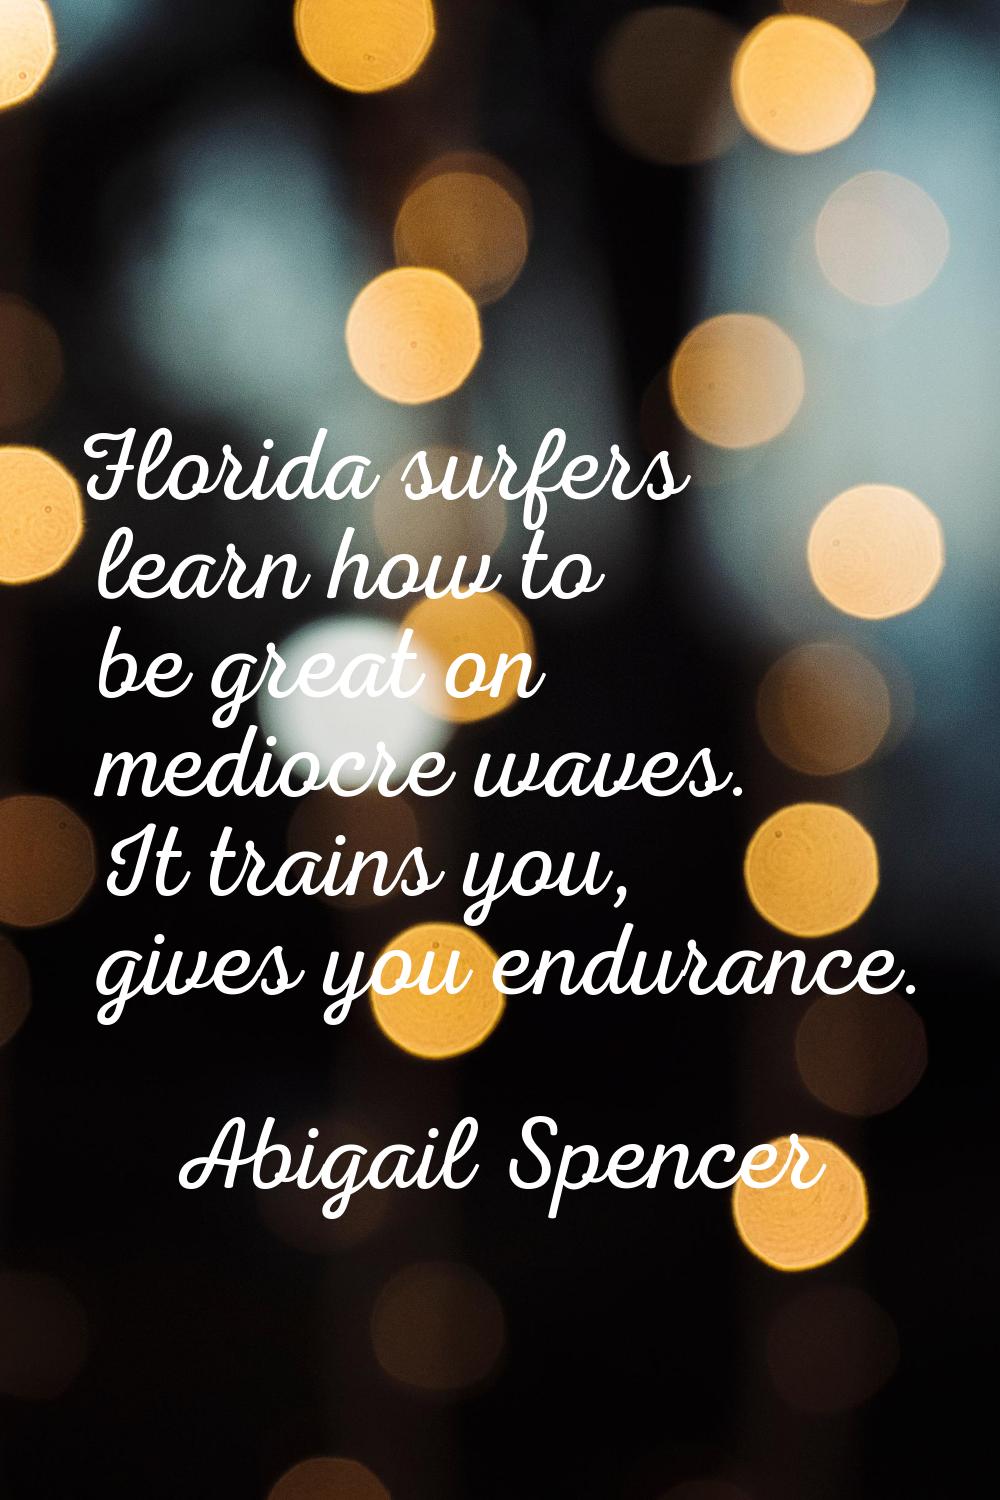 Florida surfers learn how to be great on mediocre waves. It trains you, gives you endurance.